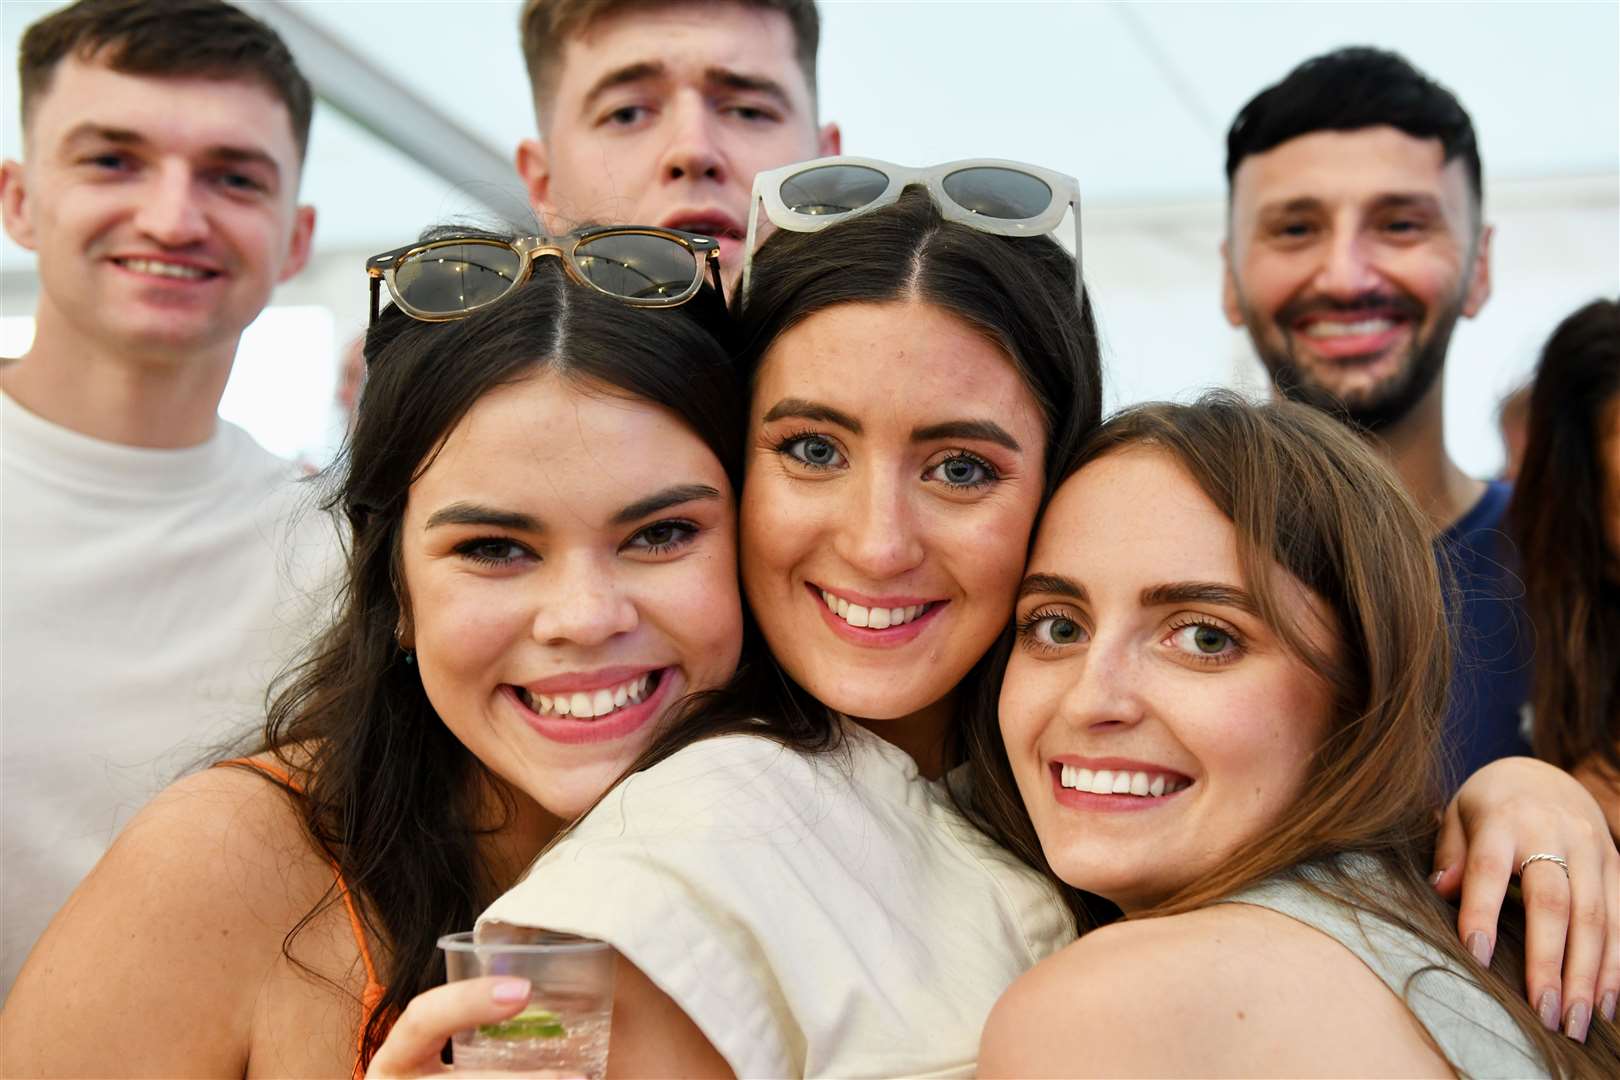 A group of festival-goers posing for a snapshot. © John Wright Studio